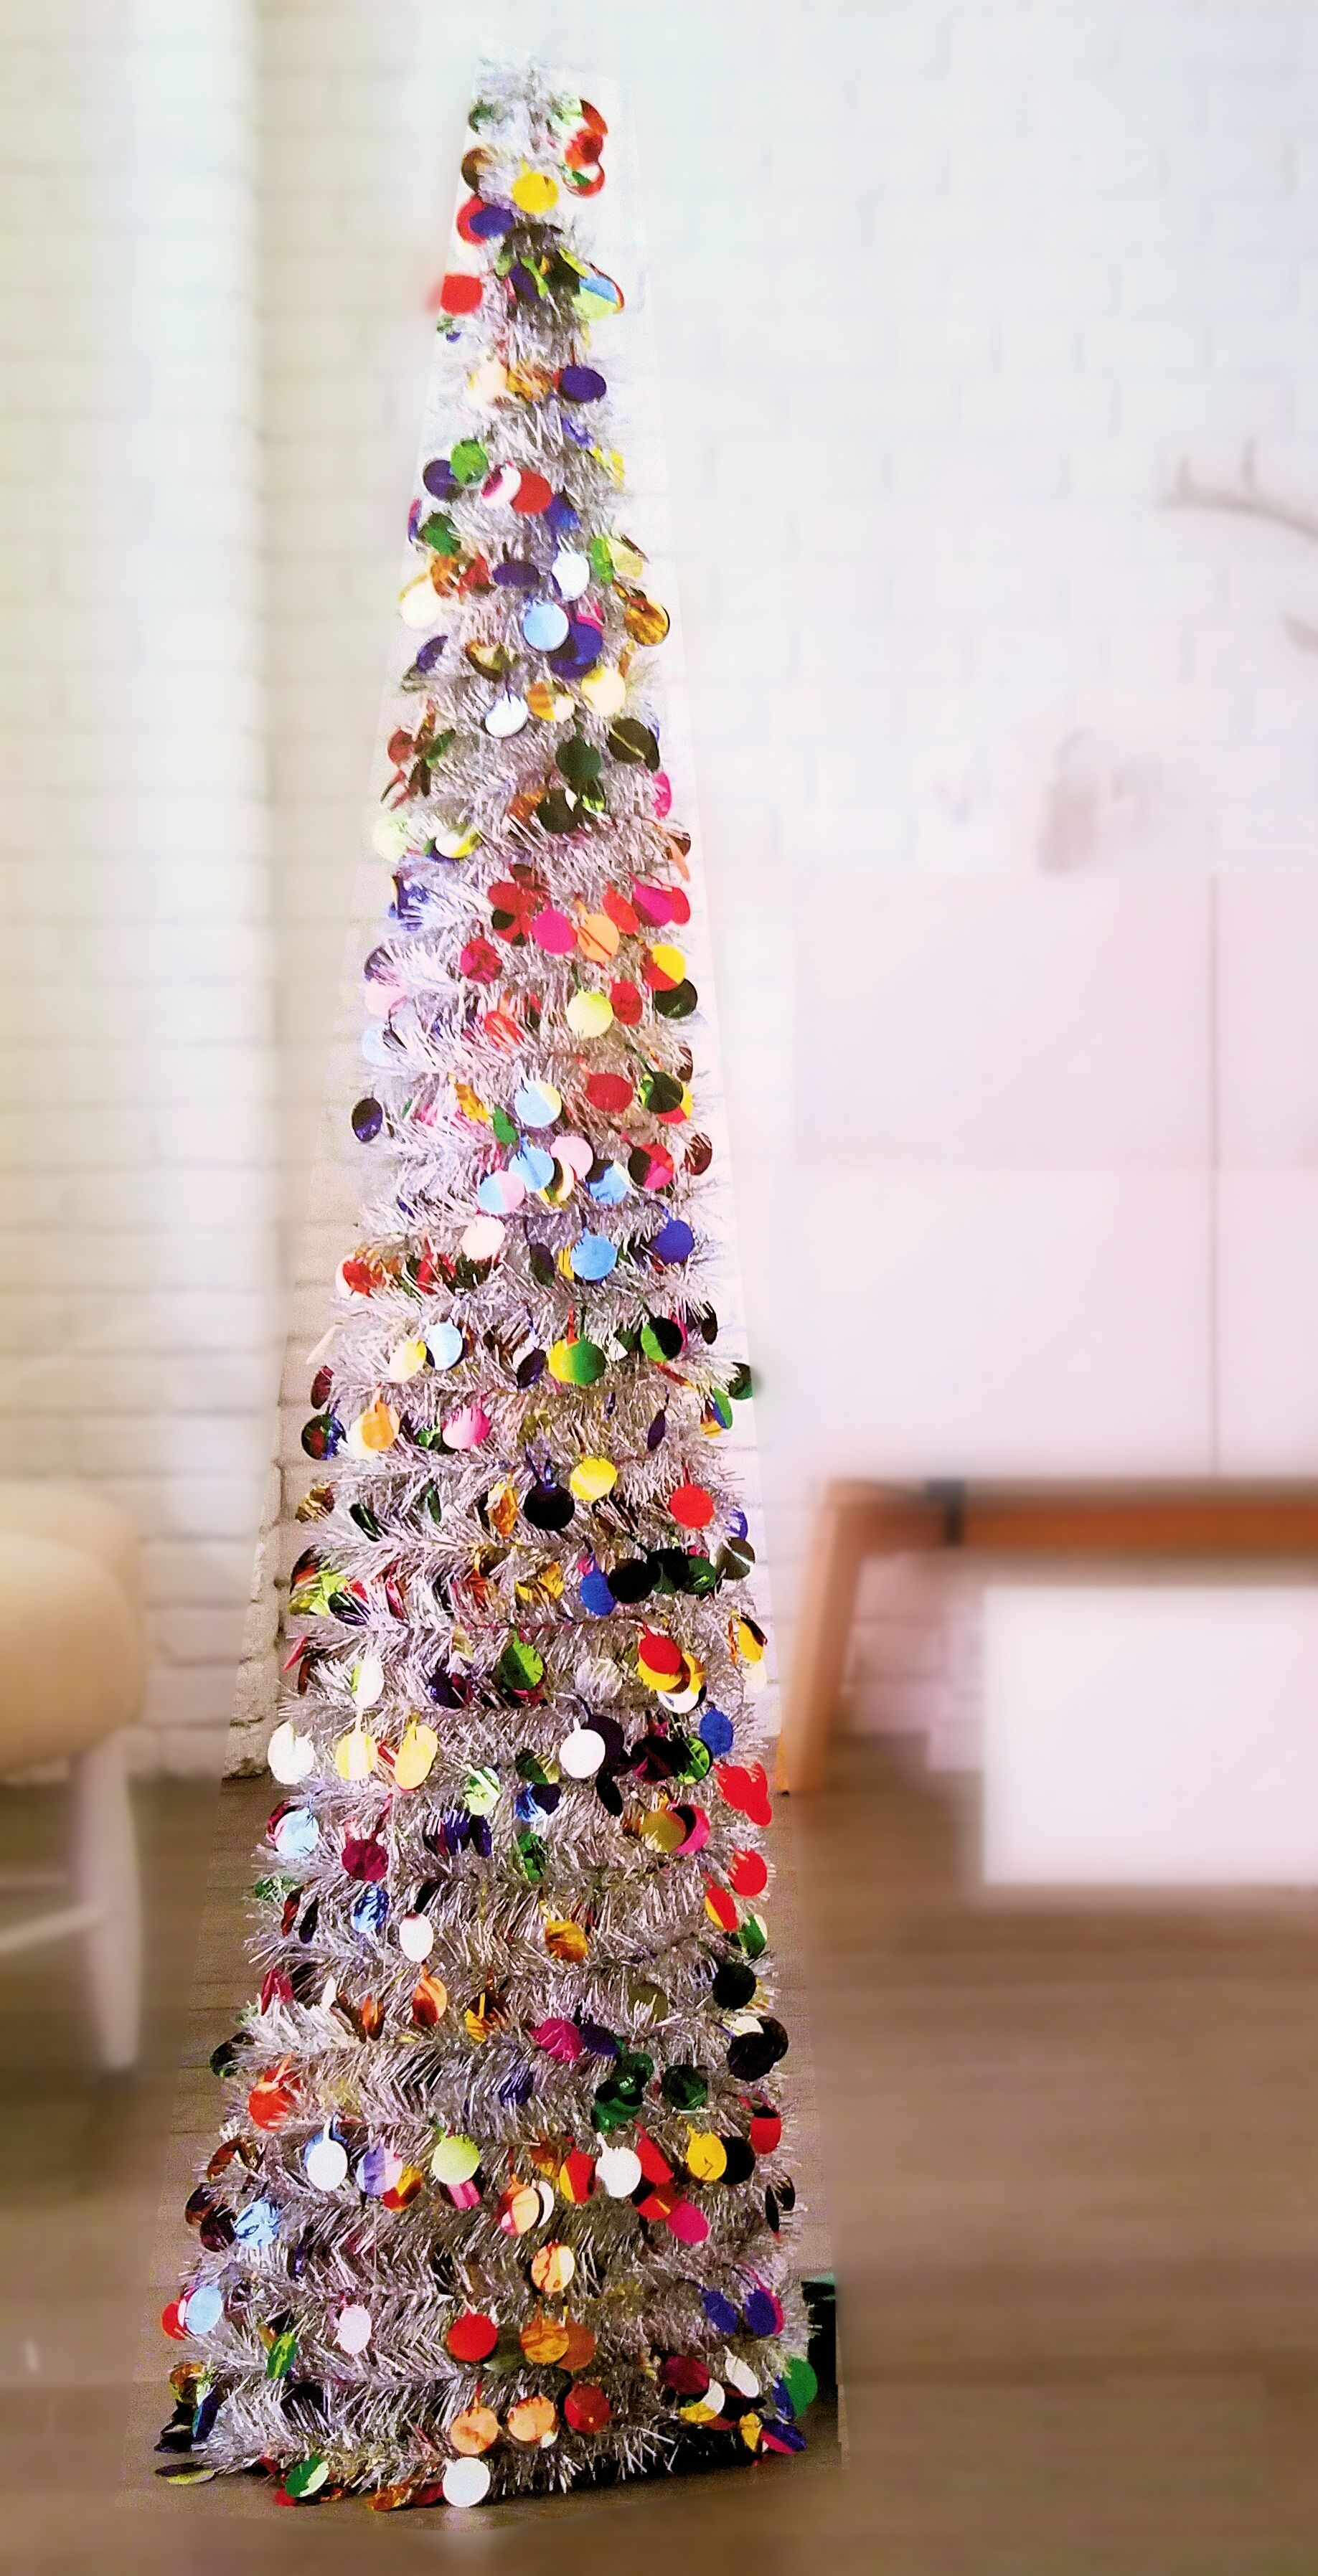 Collapsible Tinsel Tree